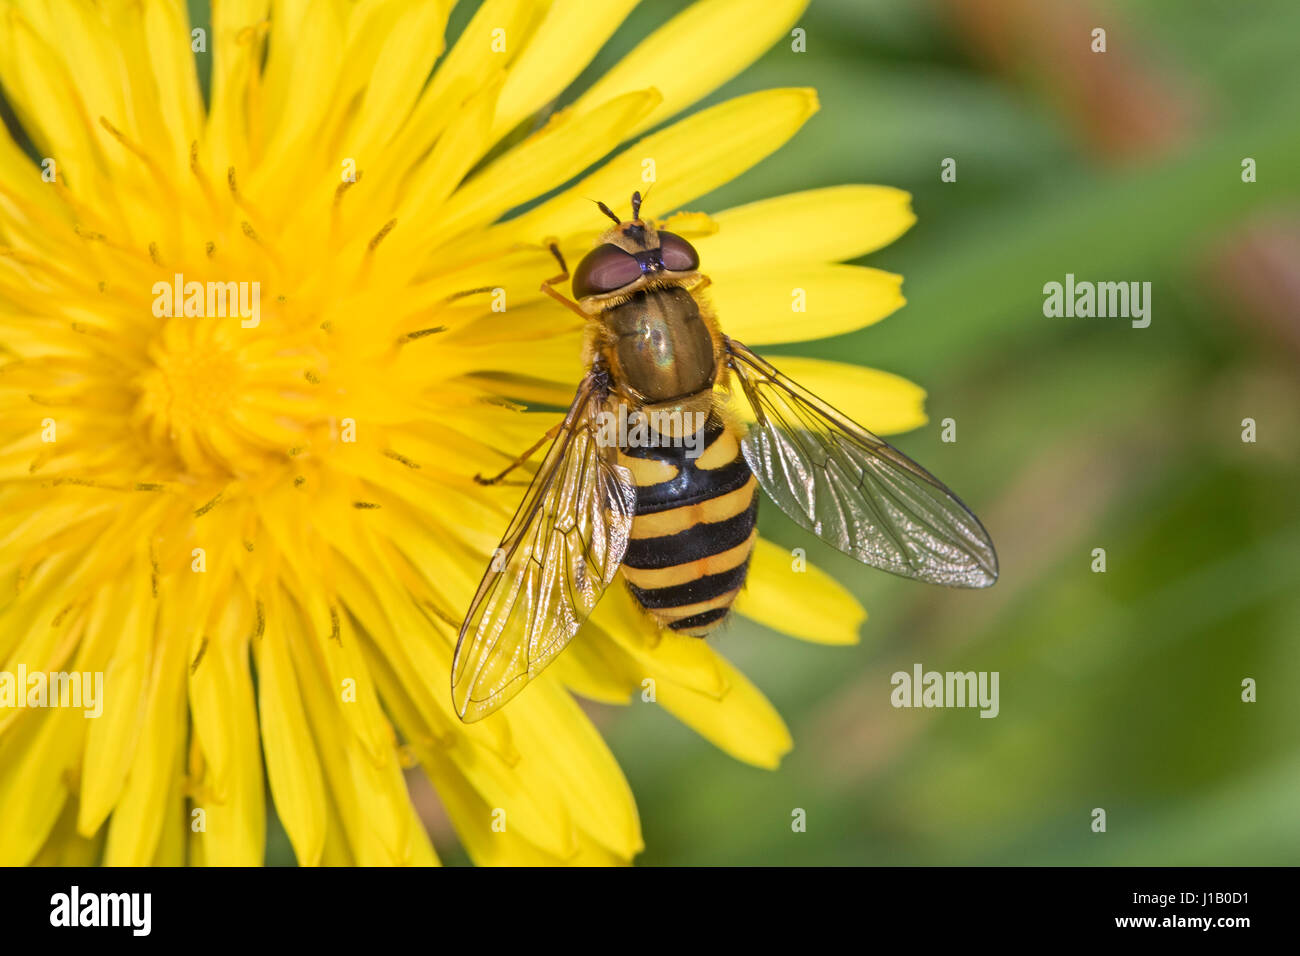 Hoverfly (Syrphus Sp) on dandelion Stock Photo